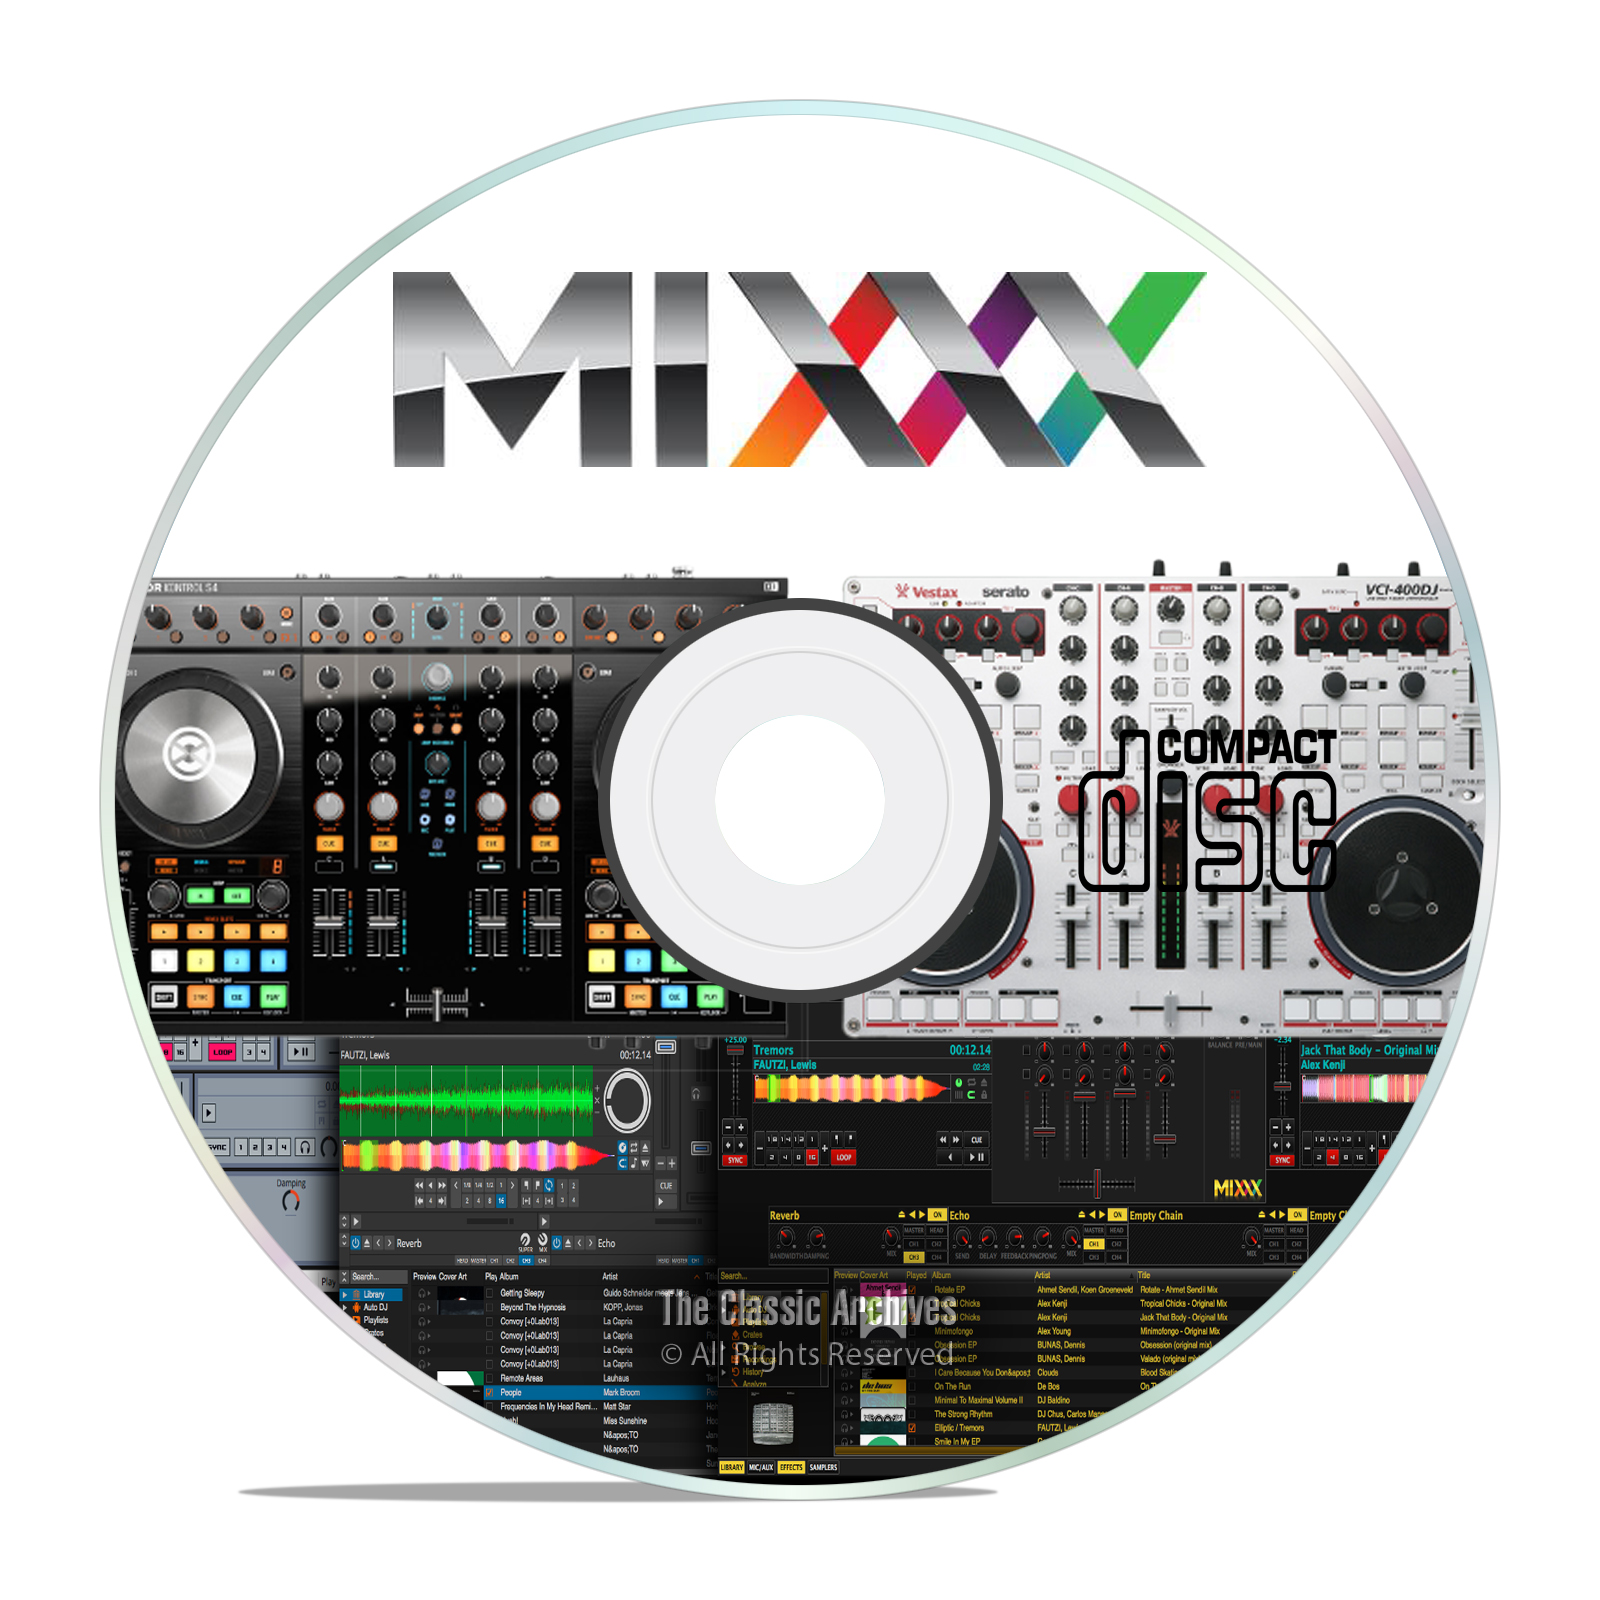 Professional DJ Music Mixing Software, Mixxx, MIDI Controller Support CD